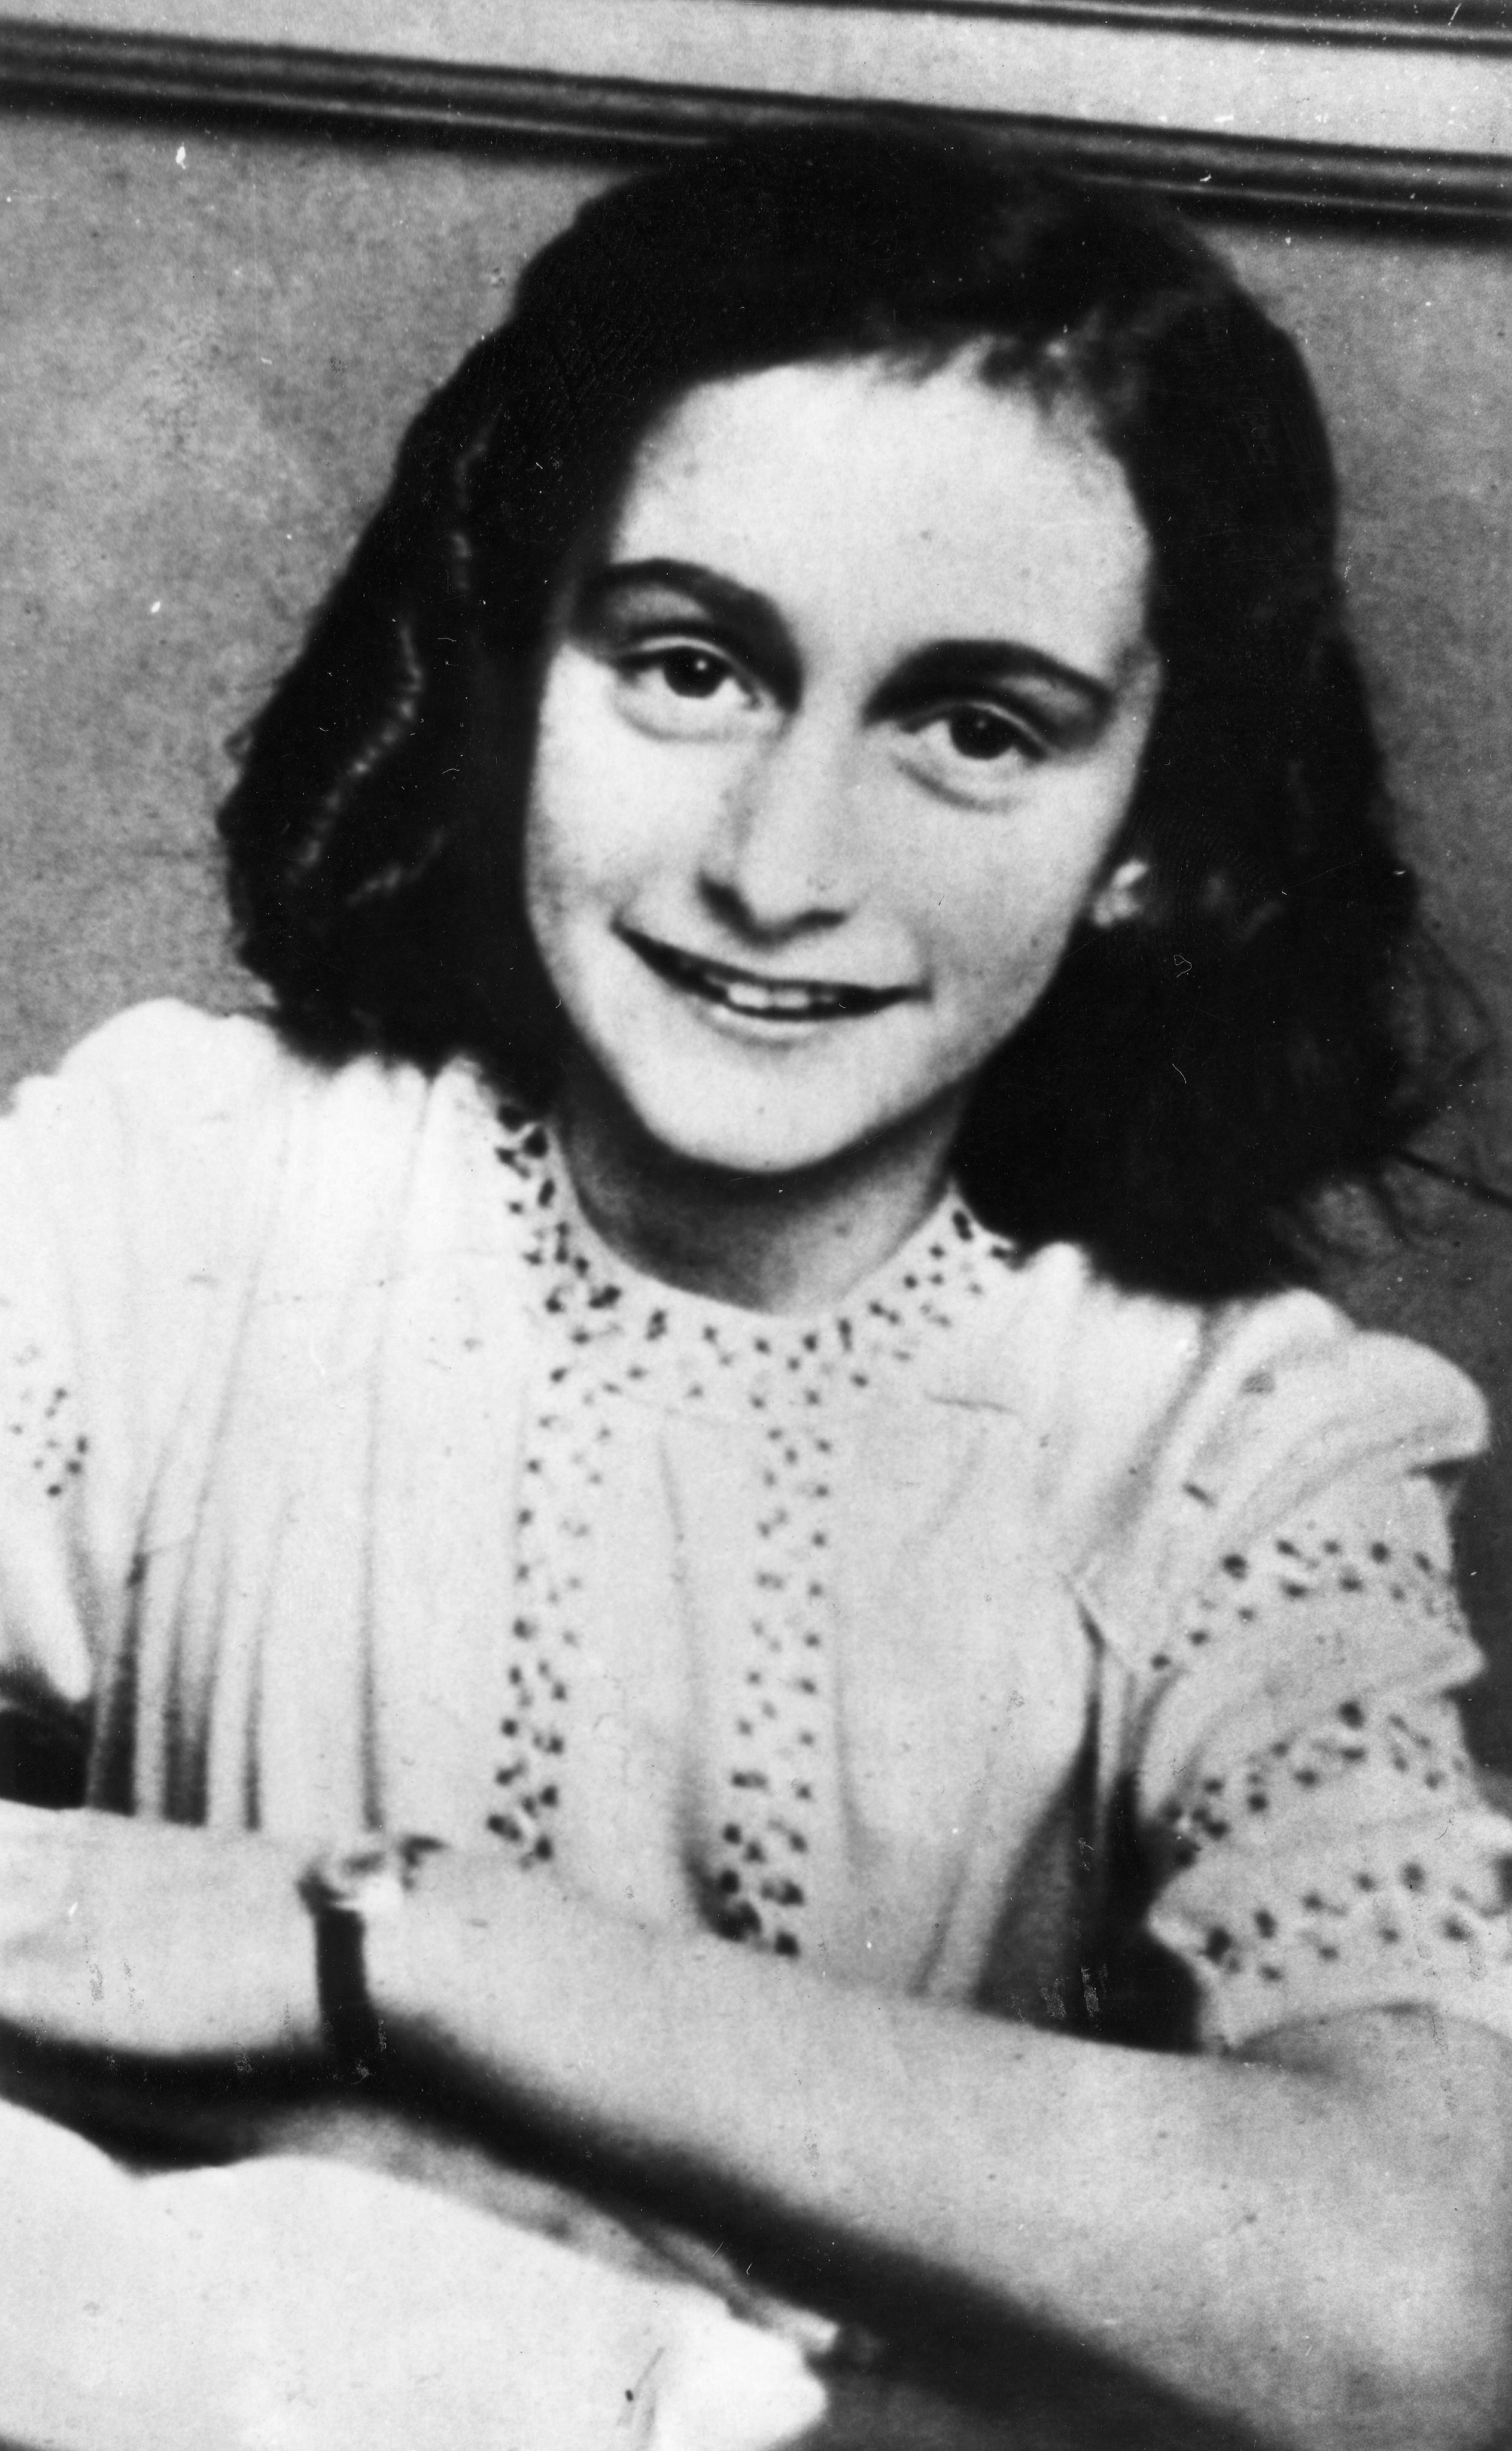 Important Quotes From Anne Frank's Diary